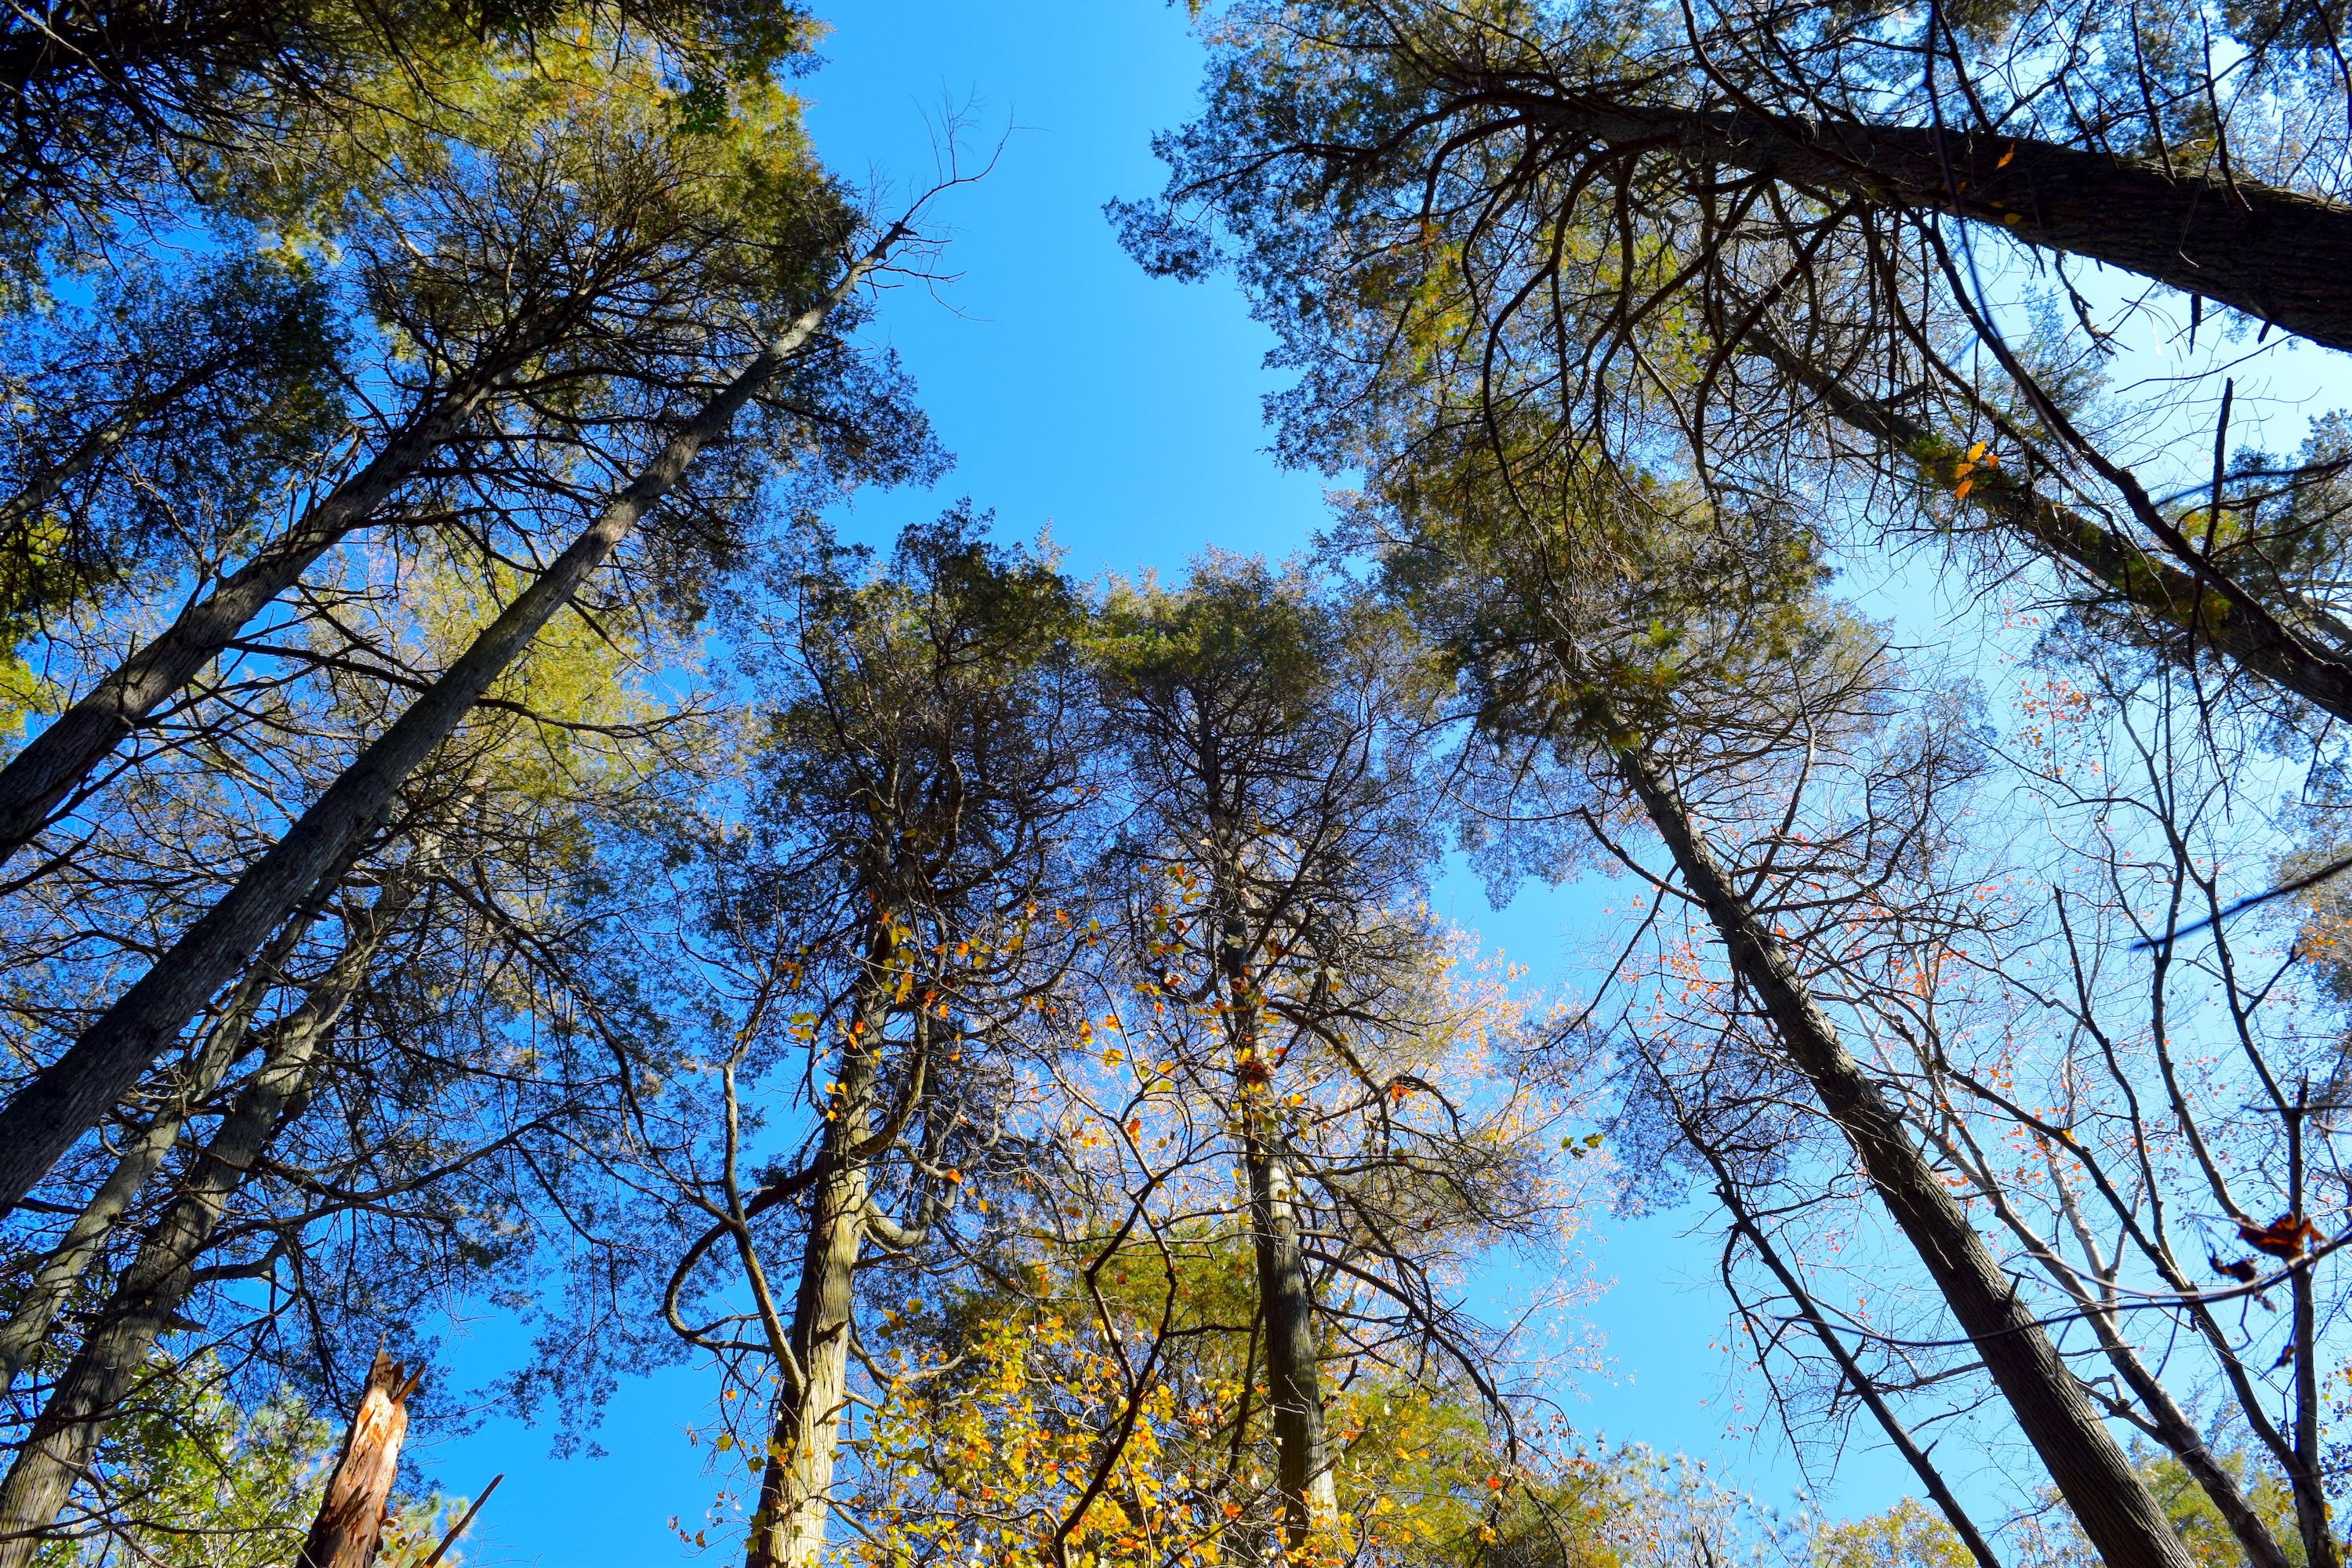 A view from the forest floor toward to sky of several tall trees against a bright blue sky.